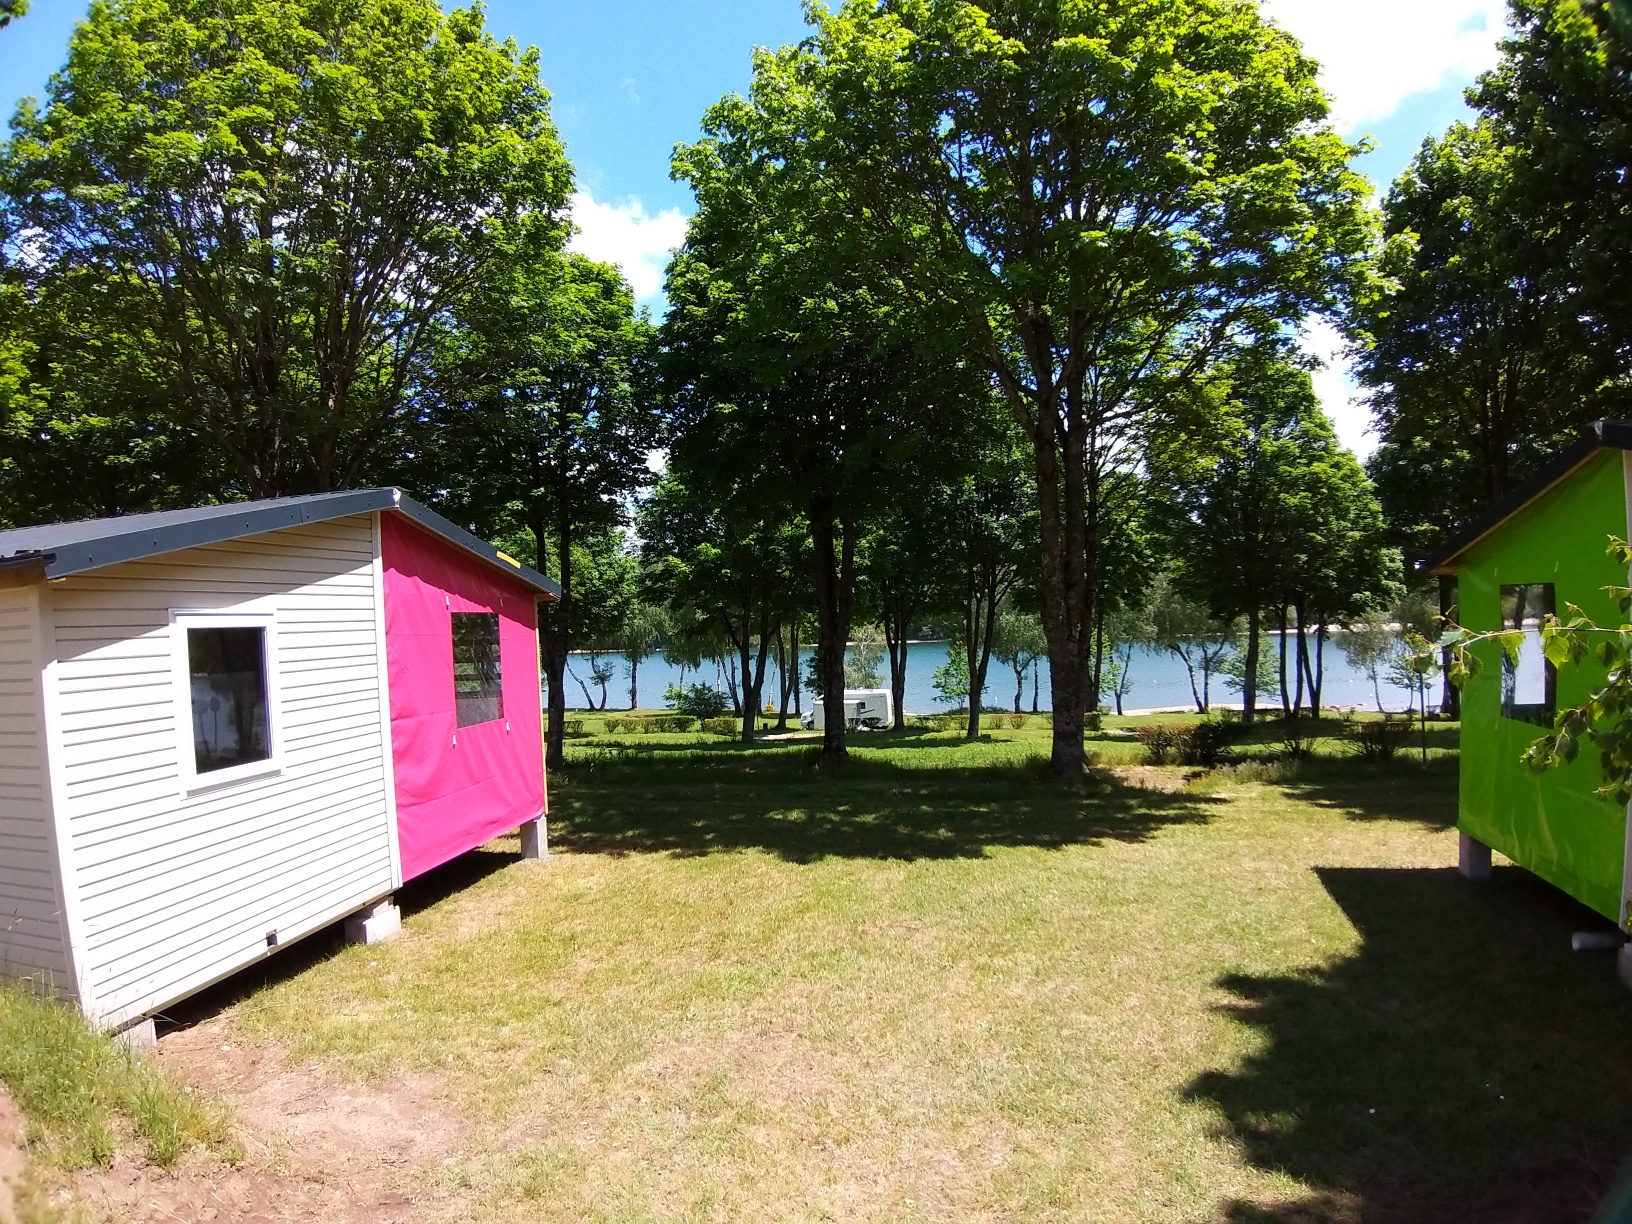 Accommodation - Bungalow Tithome 20M2 No Sanitary Equipments, Lake View, In July/August Arrival Day On Friday - Camping SOLEIL LEVANT